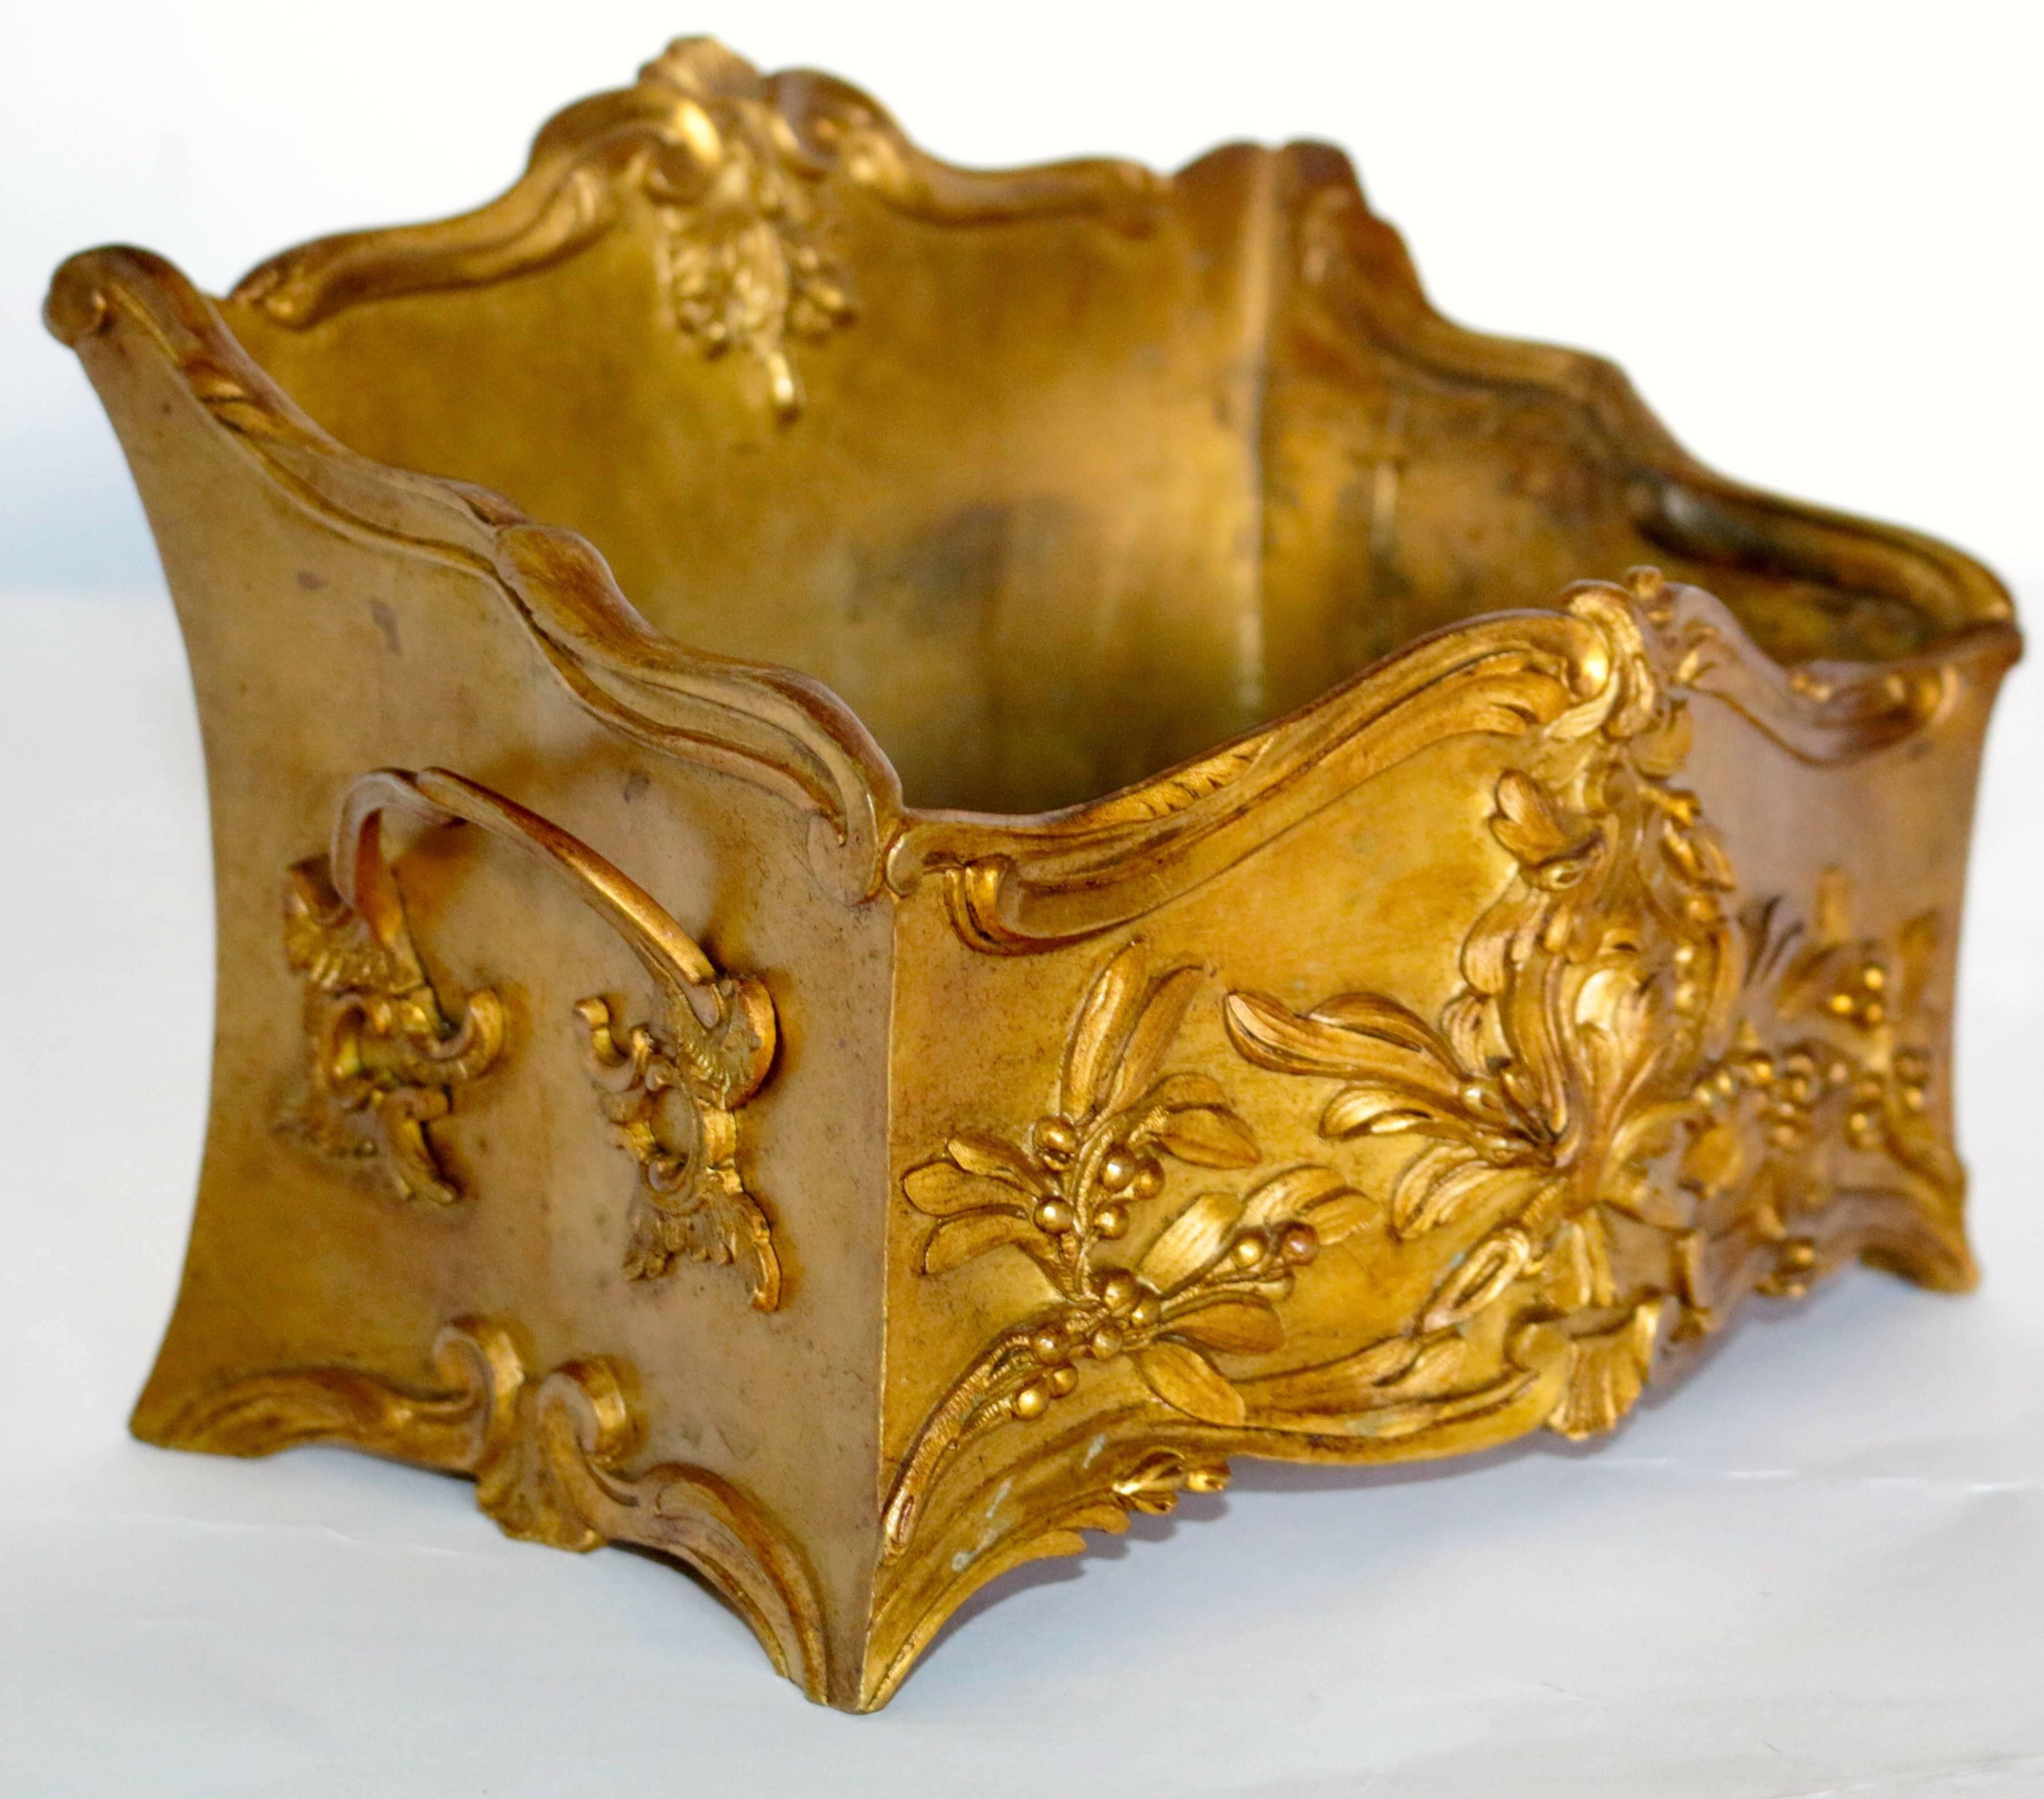 French Provincial 19th Century French Decorated Gilt Bronze Box